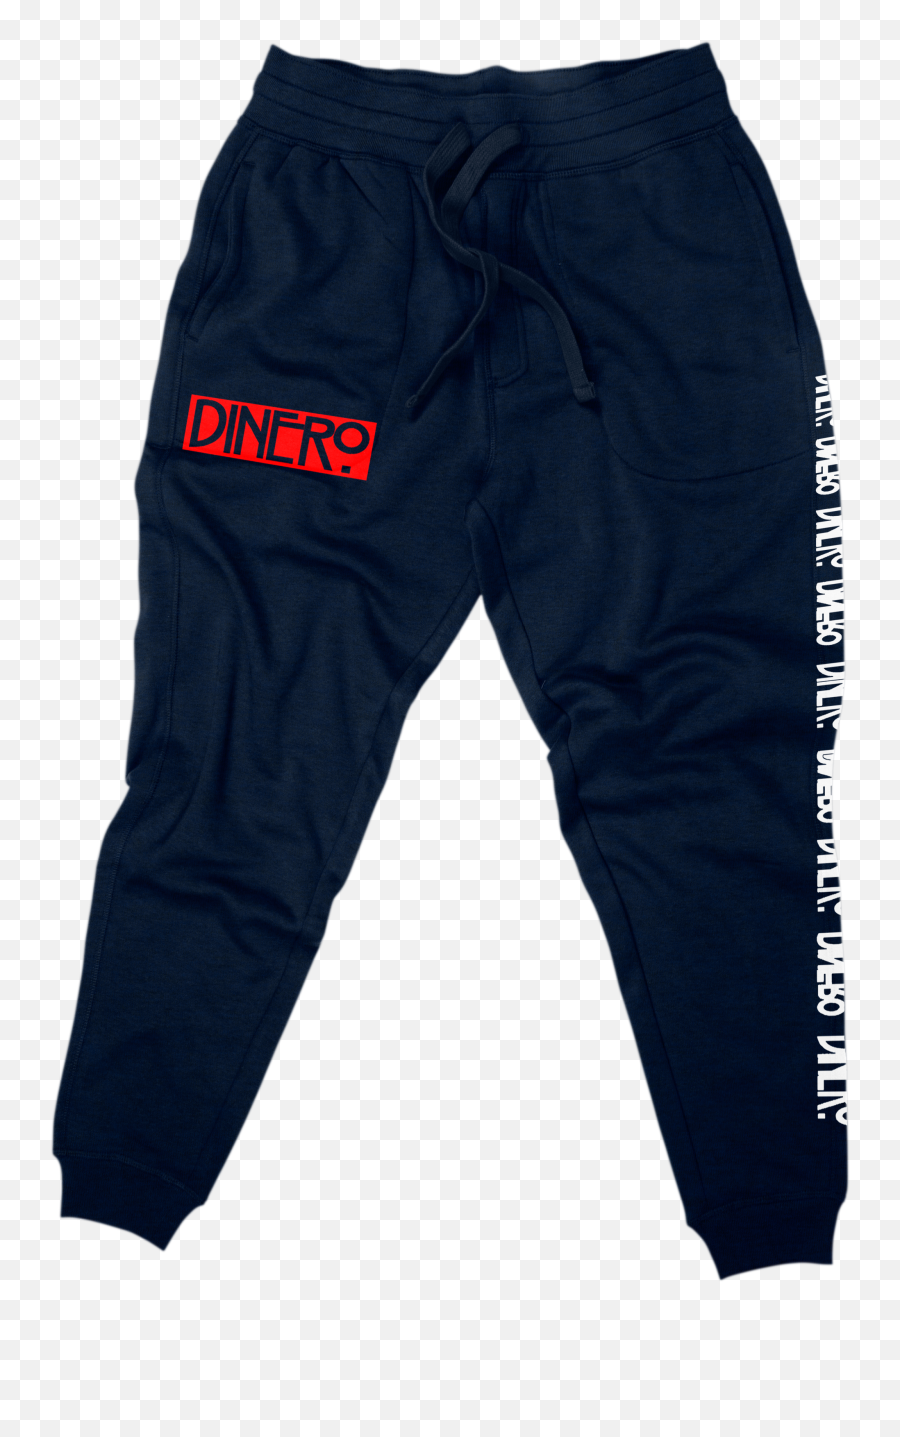 Red Dinero Png Image With No Background - Sweatpants Emoji,Dinero Png